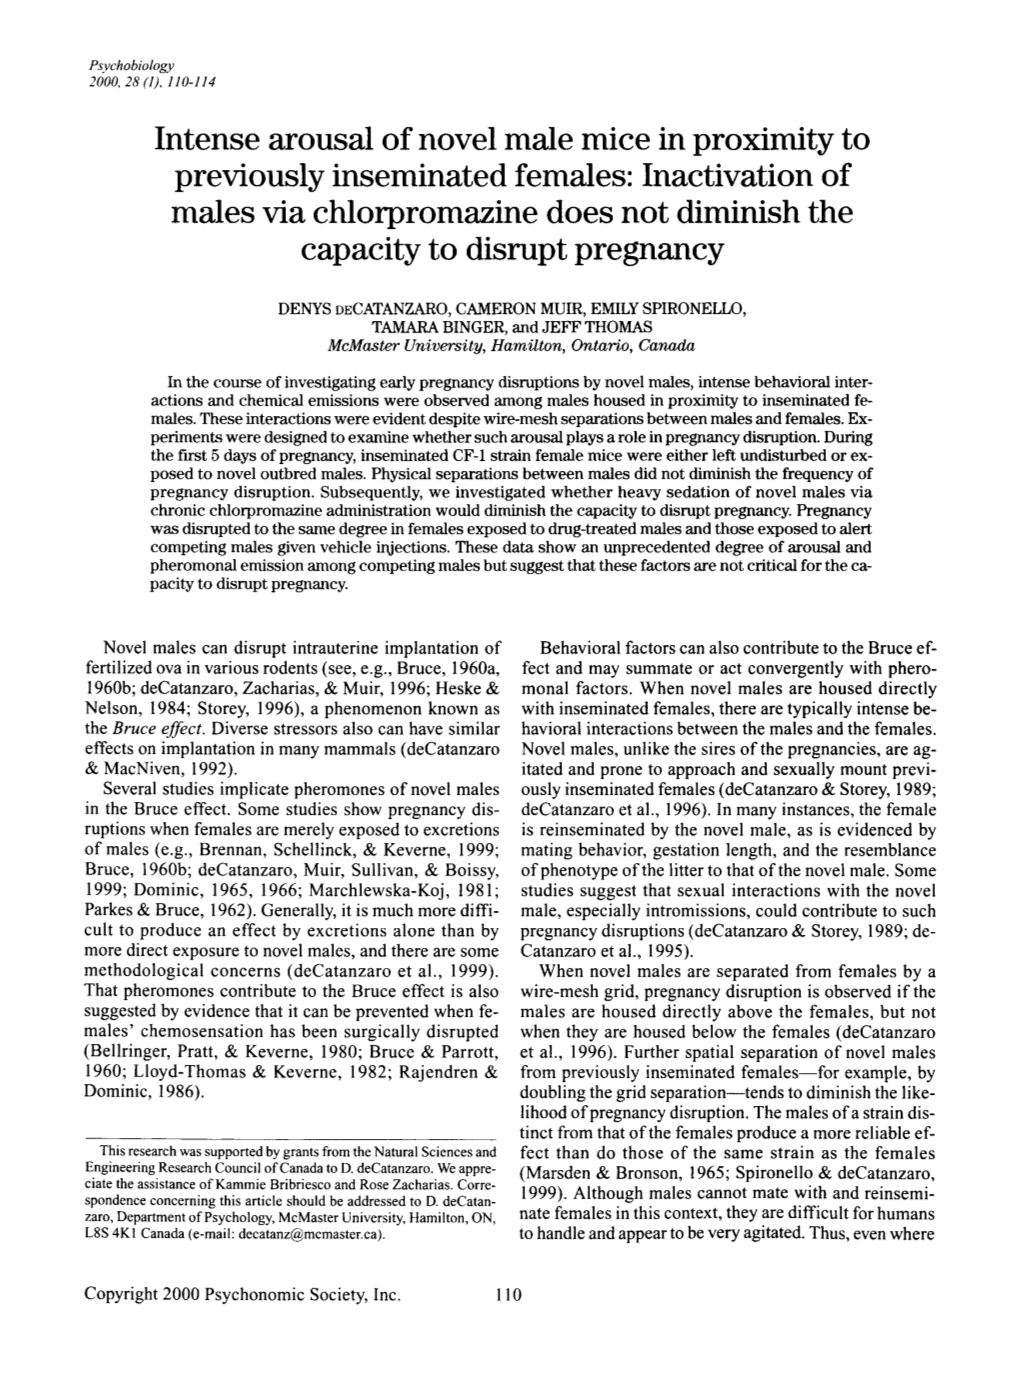 Intense Arousal of Novel Male Mice in Proximity to Previously Inseminated Females: Inactivation of Males Via Chlorpromazine Does